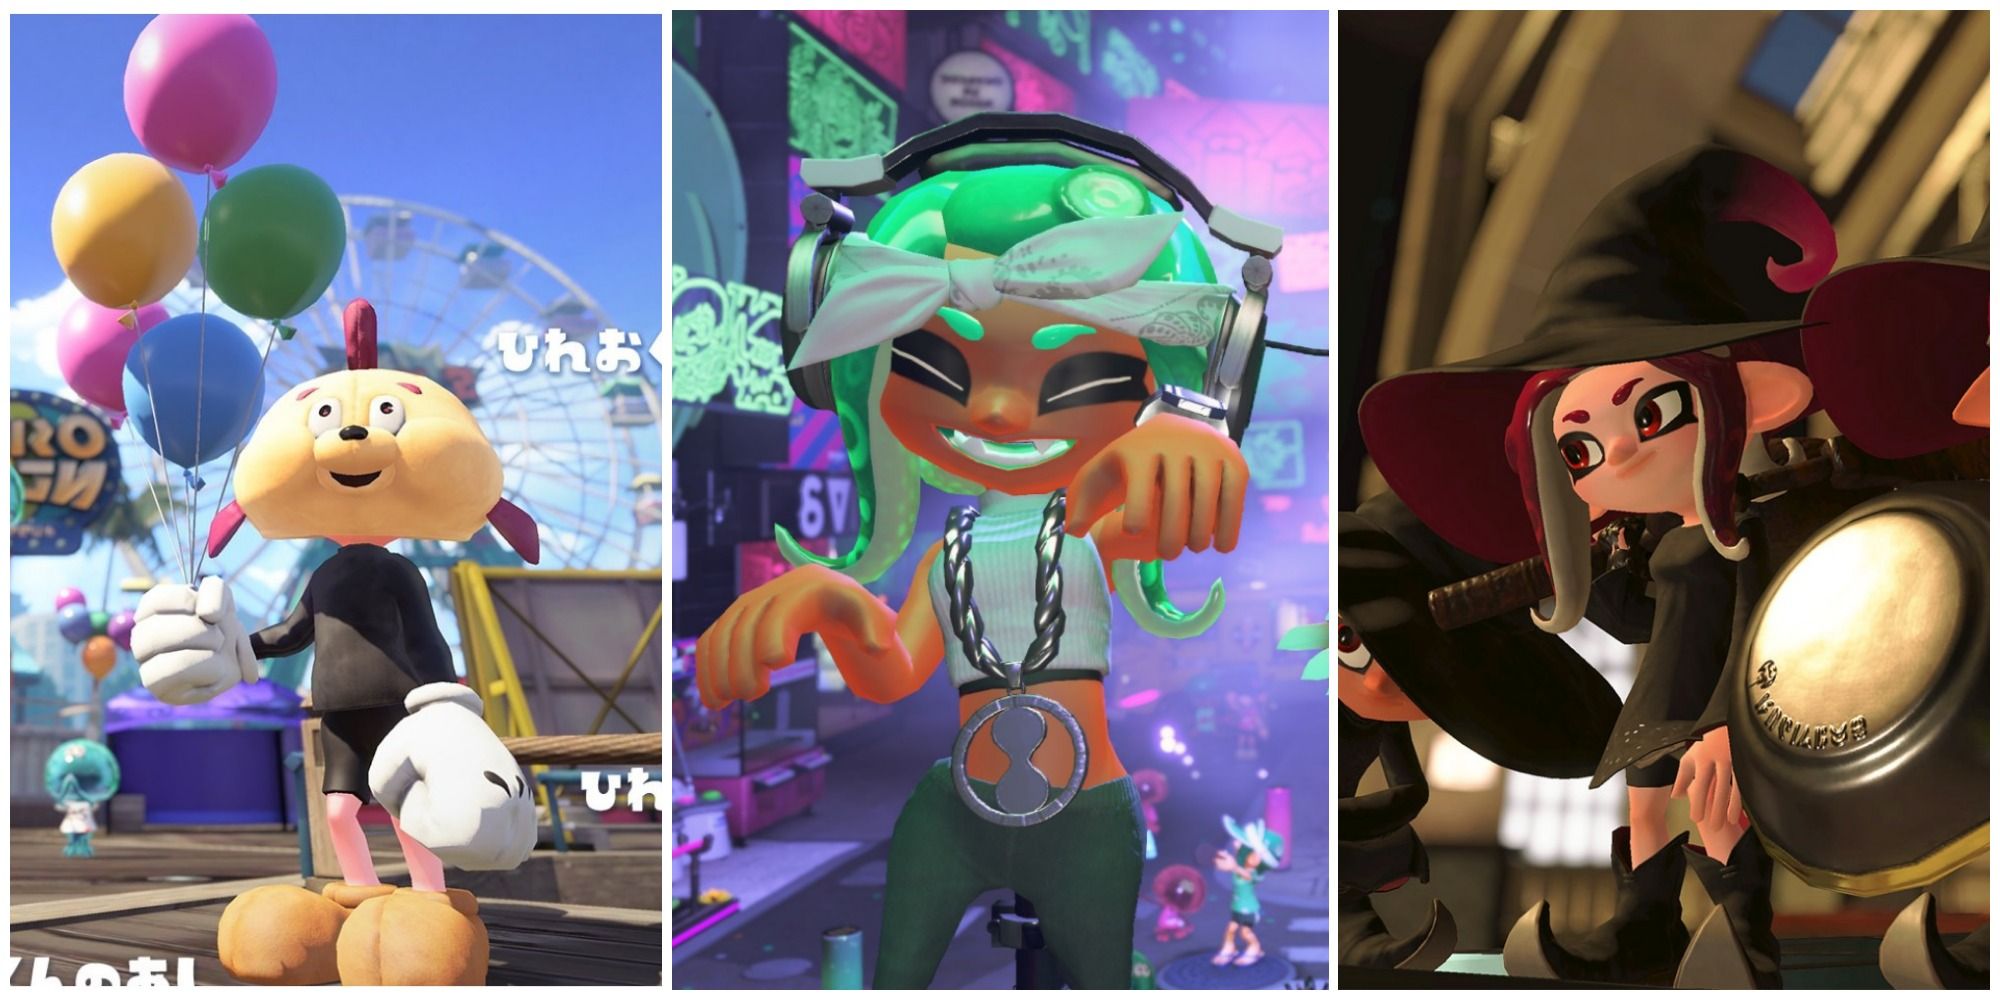 Split image of Fresh Fish costume, Marina costume, and a witch costume worn by Inklings in Splatoon 2